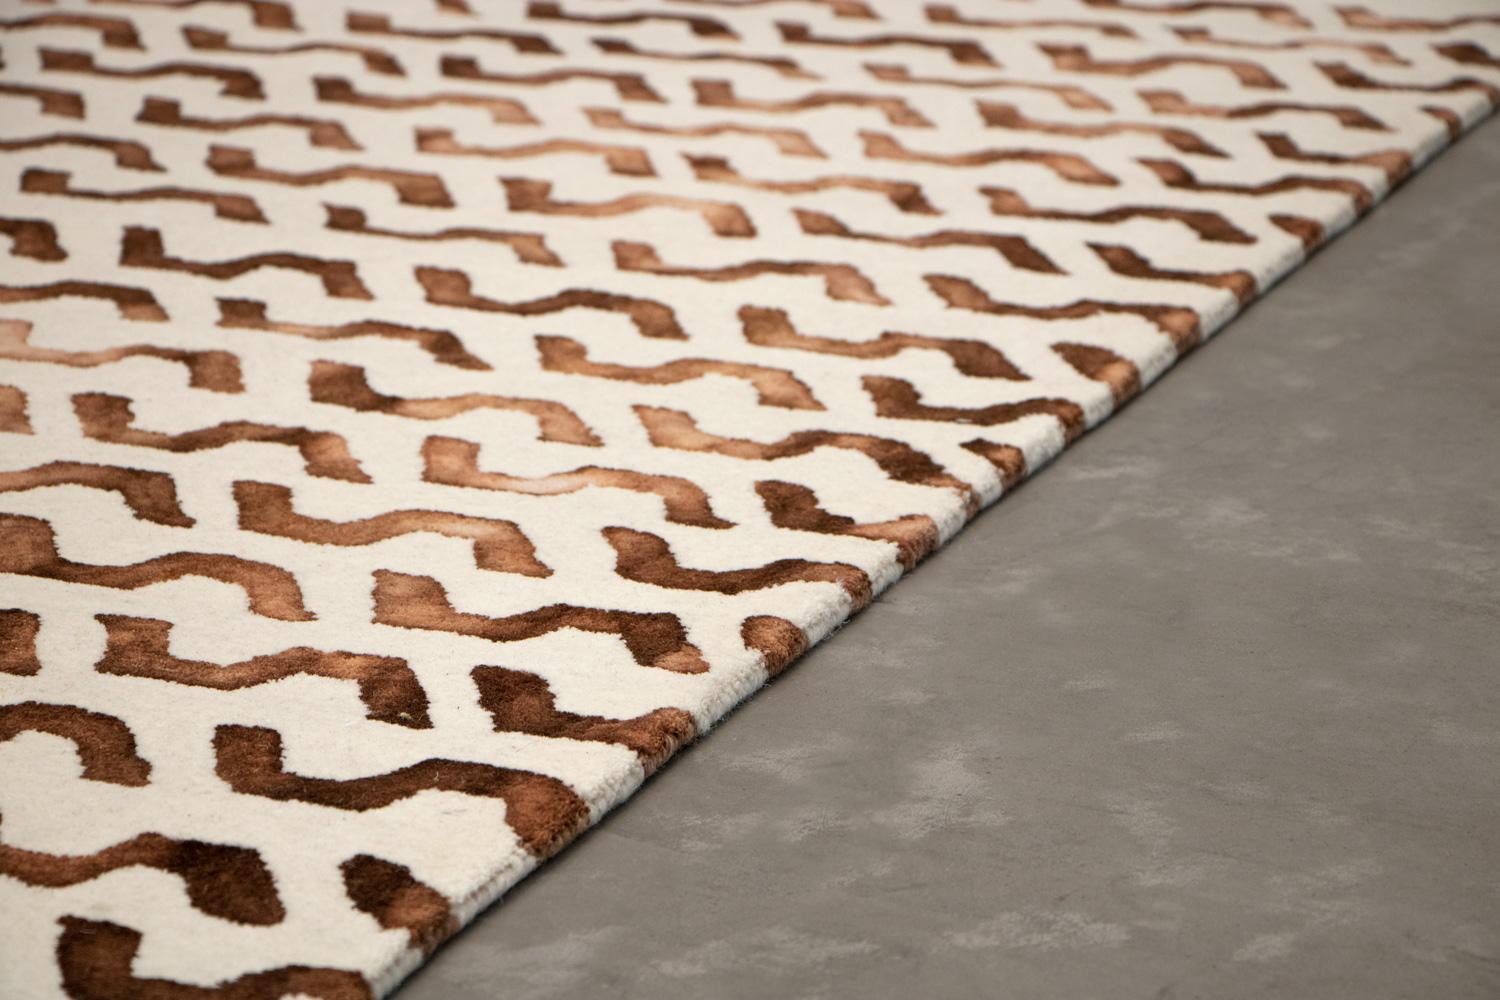 Hand-Crafted Contemporary Patterned New Zealand Wool Rug by Deanna Comellini 200x300 cm For Sale